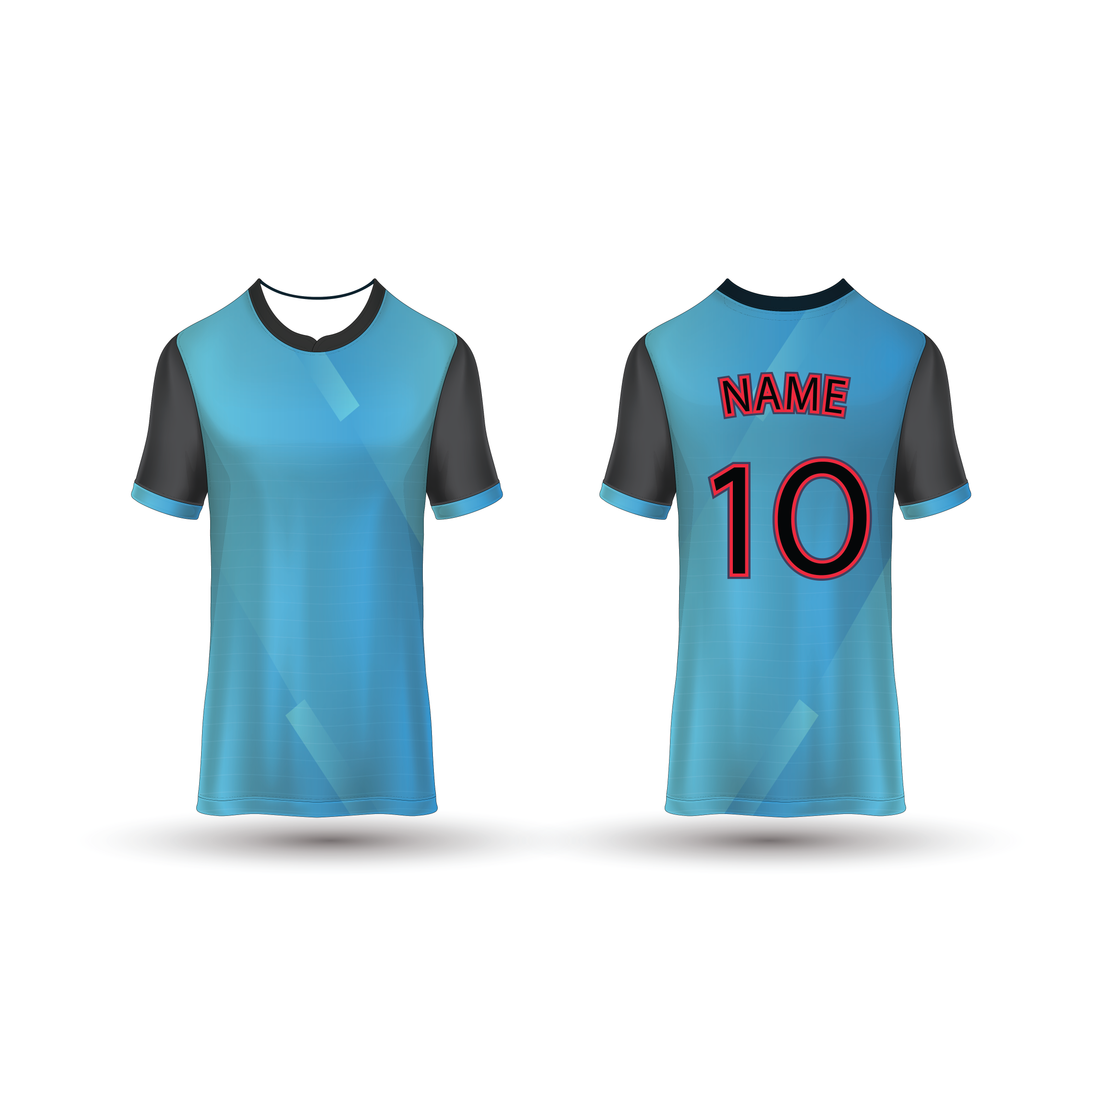 NEXT PRINT All Over Printed Customized Sublimation T-Shirt Unisex Sports Jersey Player Name & Number, Team Name NP50000230